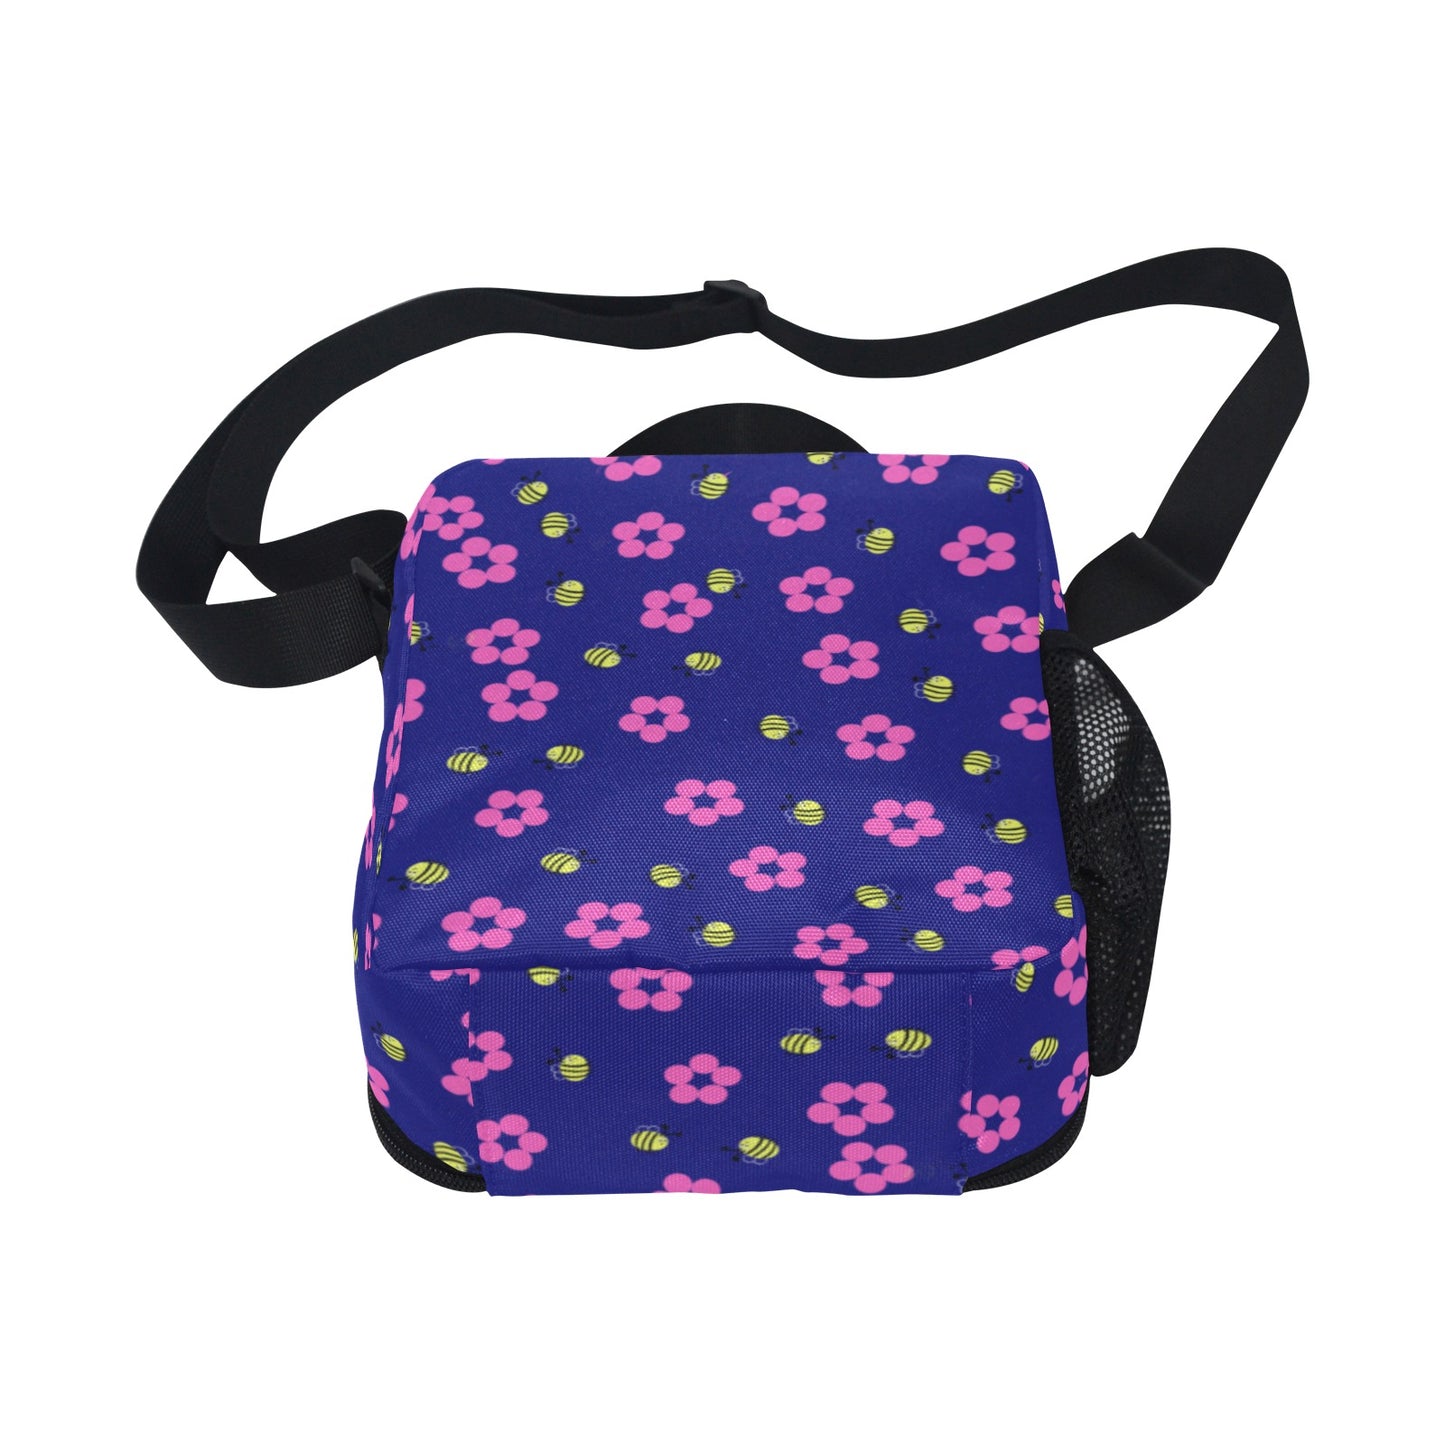 Flower and Bee Lunch Bag